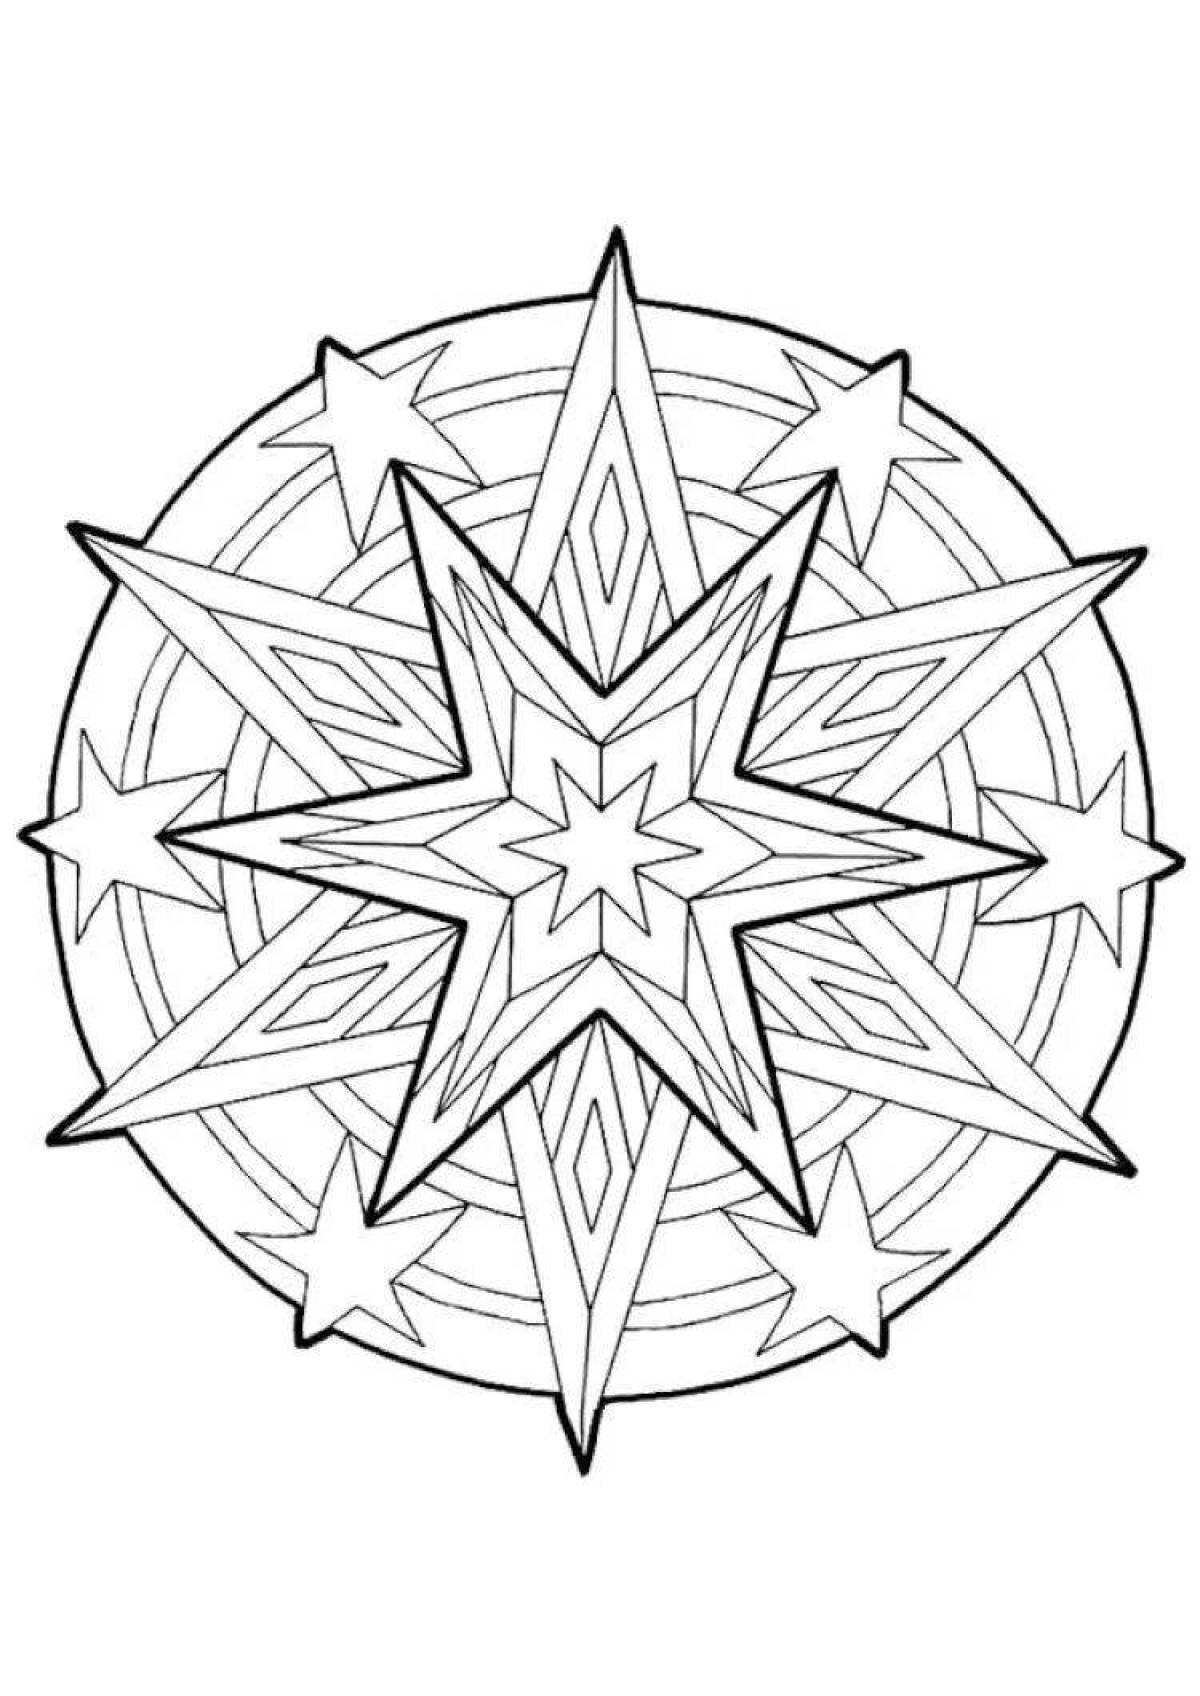 Glowing christmas star coloring book for kids